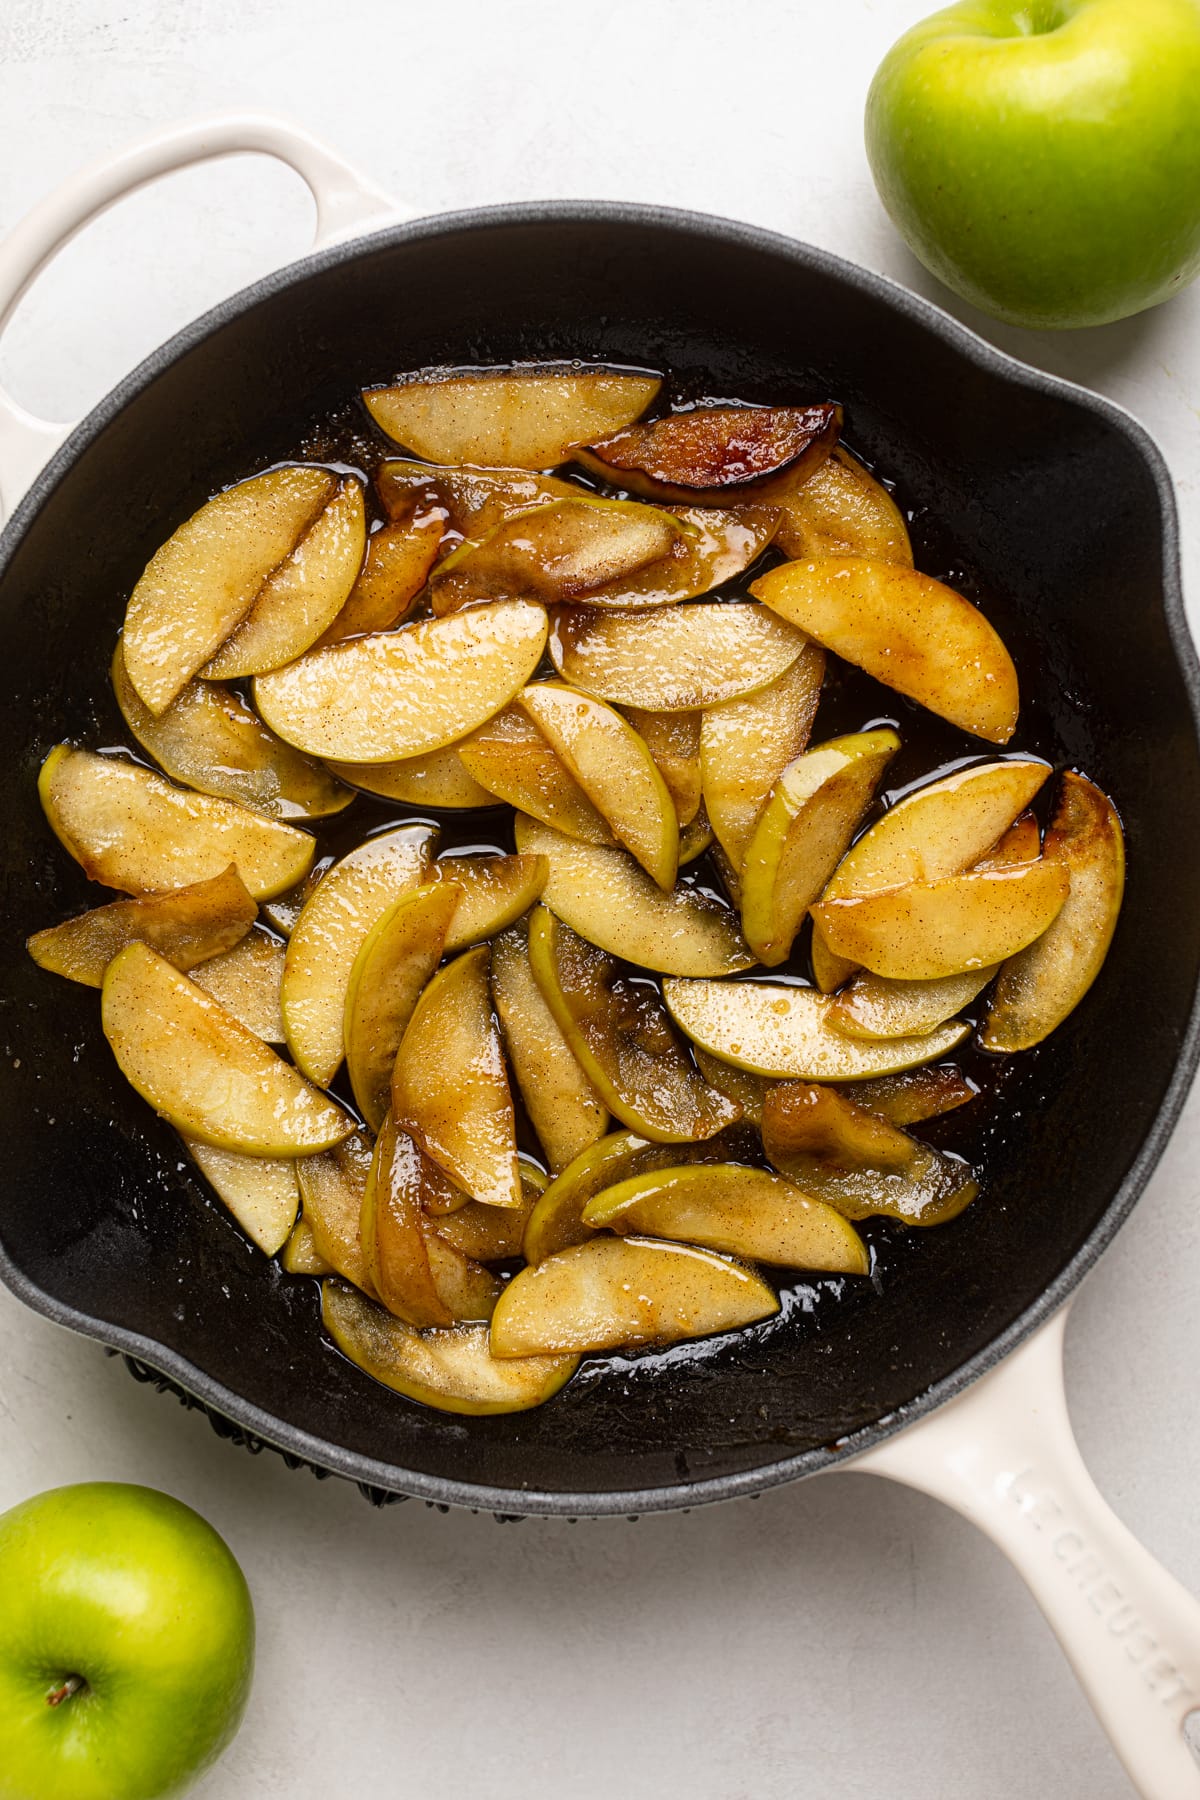 Apple slices caramelizing in a pan